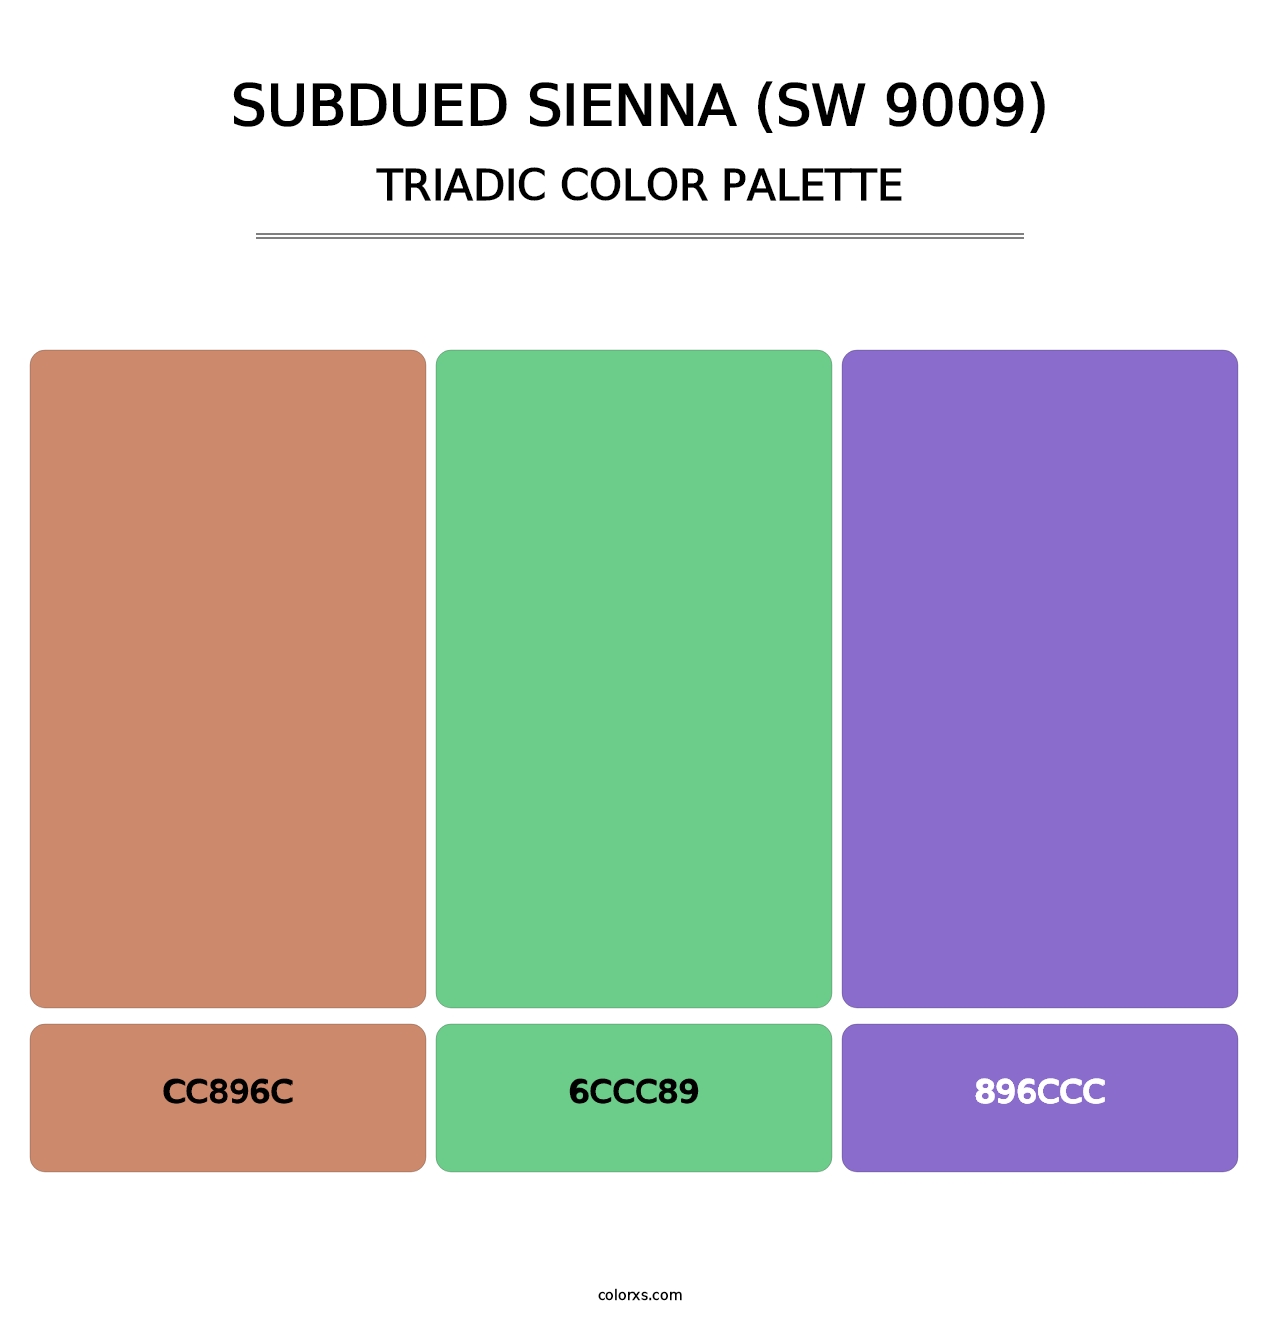 Subdued Sienna (SW 9009) - Triadic Color Palette